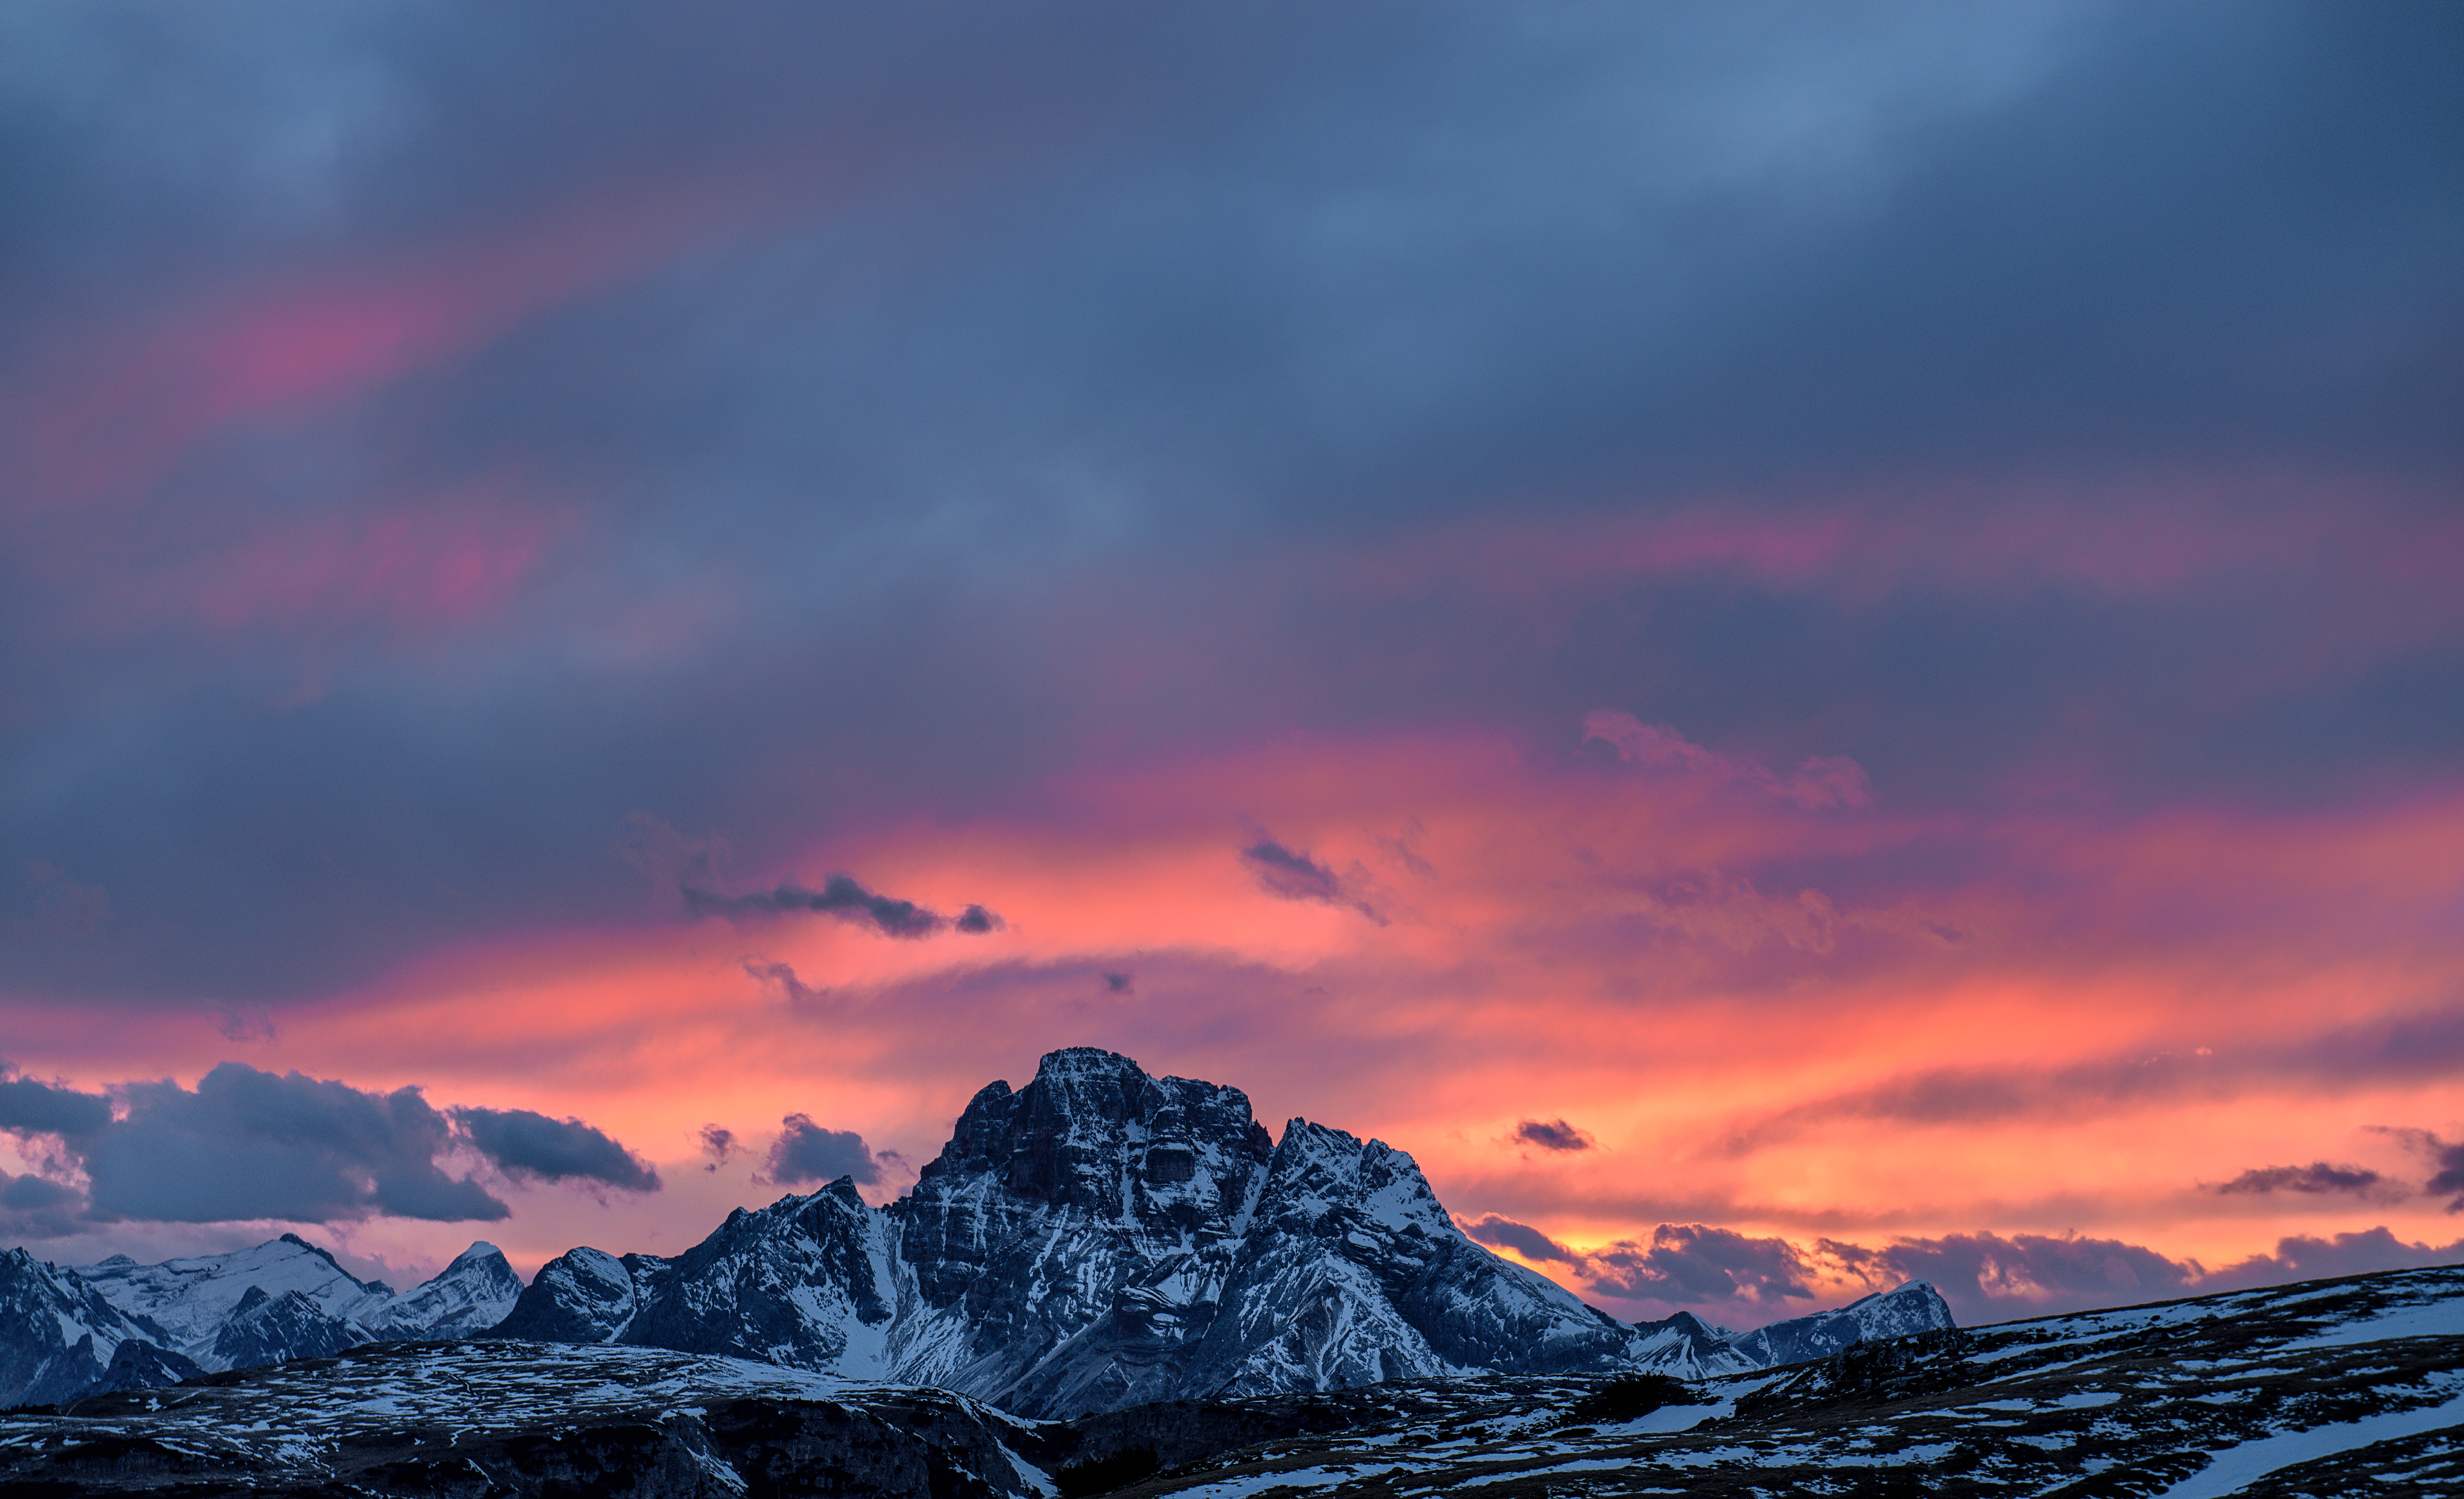 italy, nature, sunset, sky, mountains, clouds, vertex, tops, snow covered, snowbound Desktop home screen Wallpaper